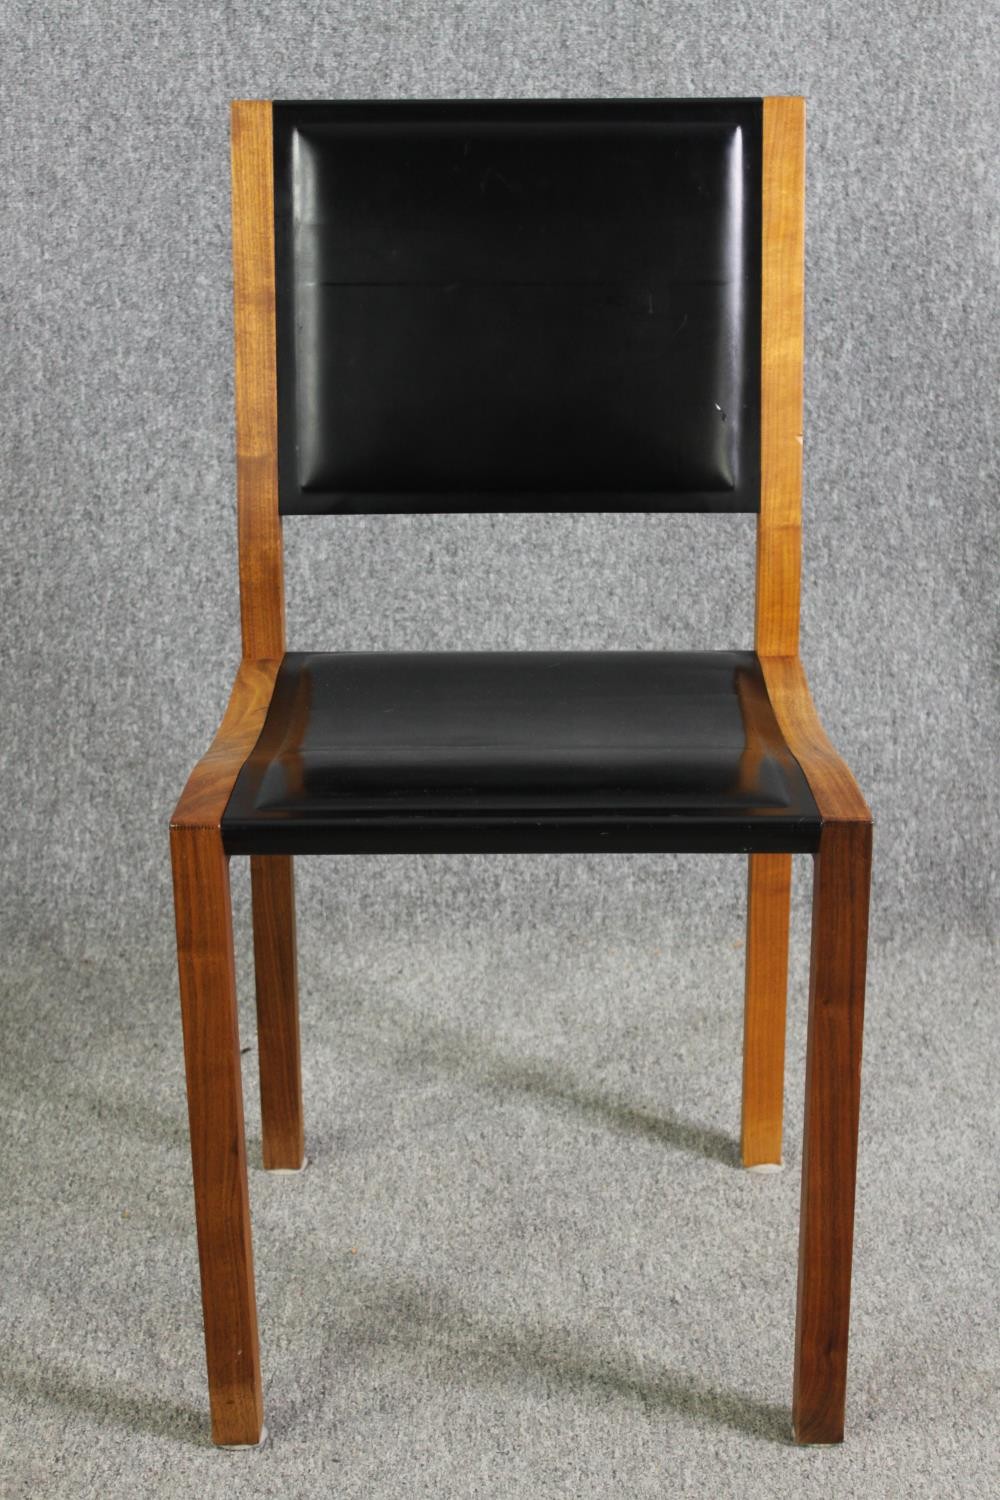 A pair contemporary Heal's teak and black leather dining chairs - Image 3 of 6